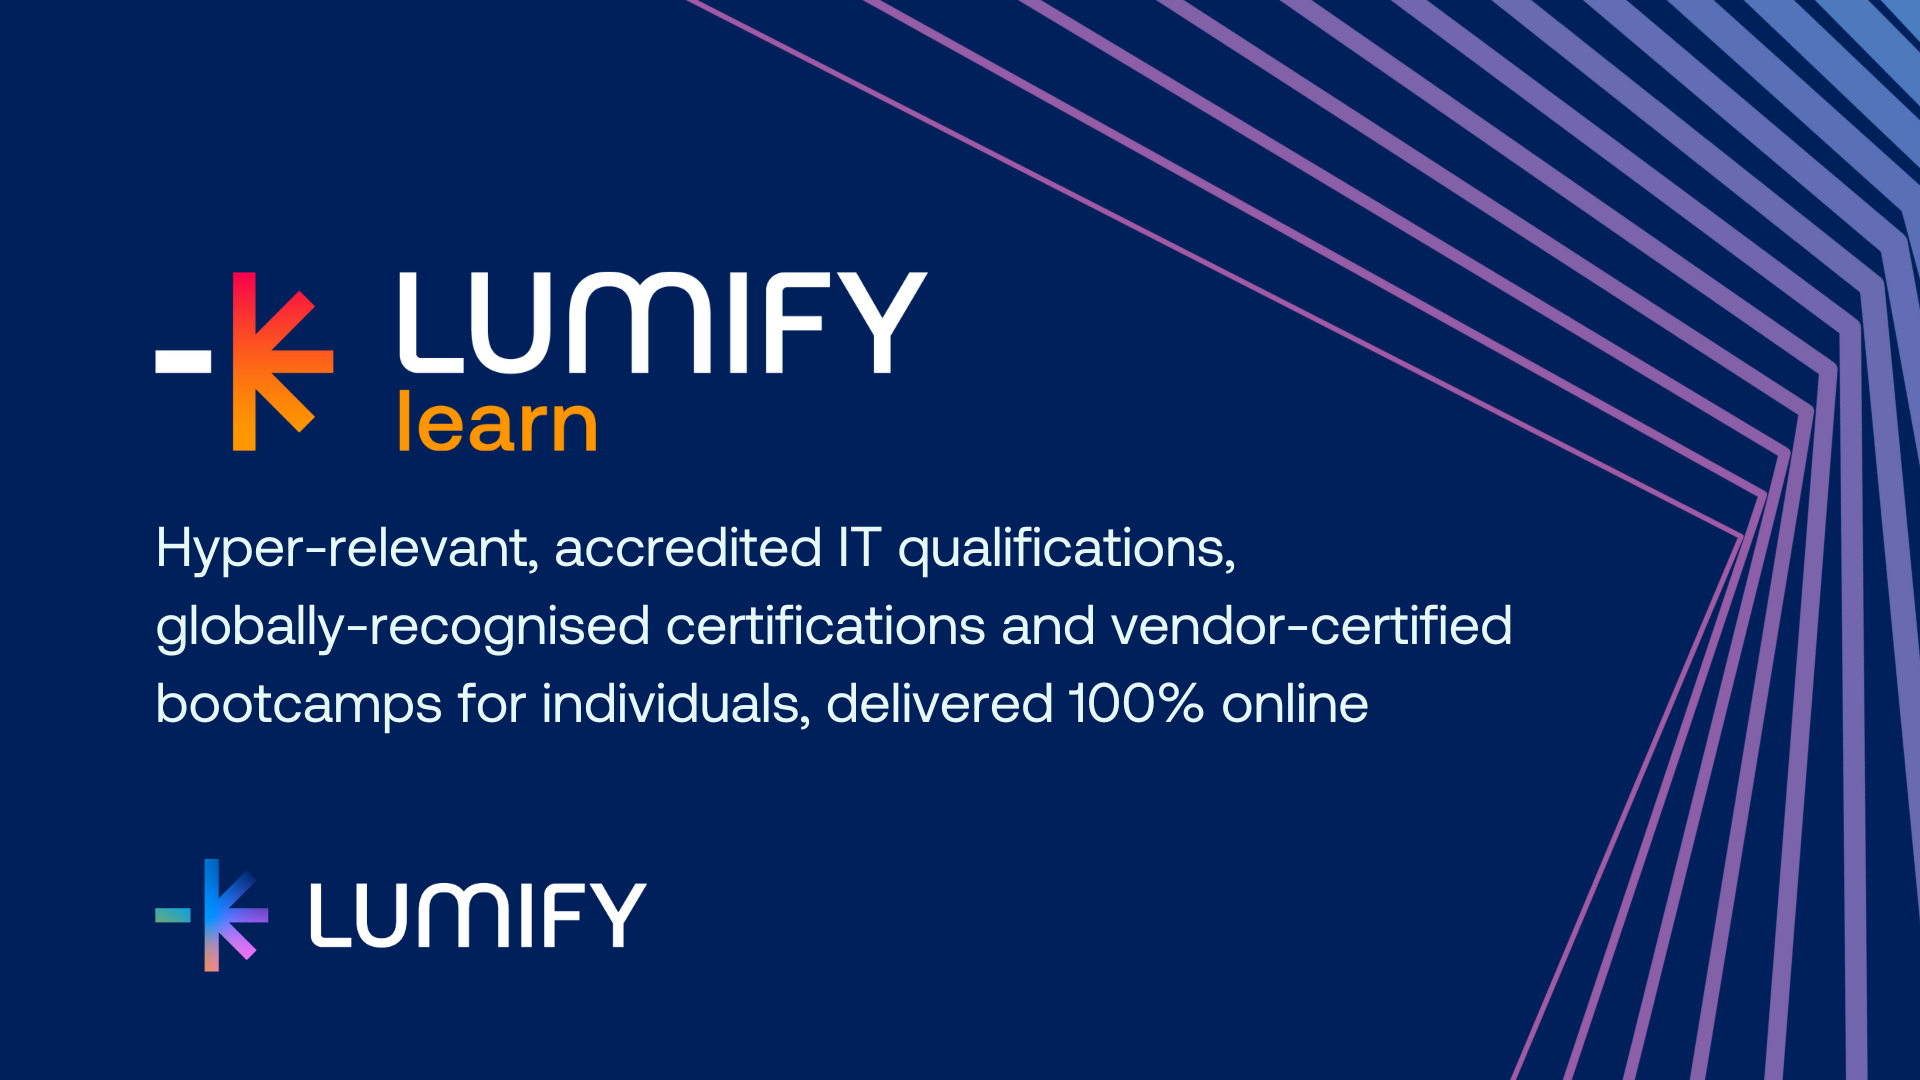 LFY - Group - Blog Share - Lumify Learn